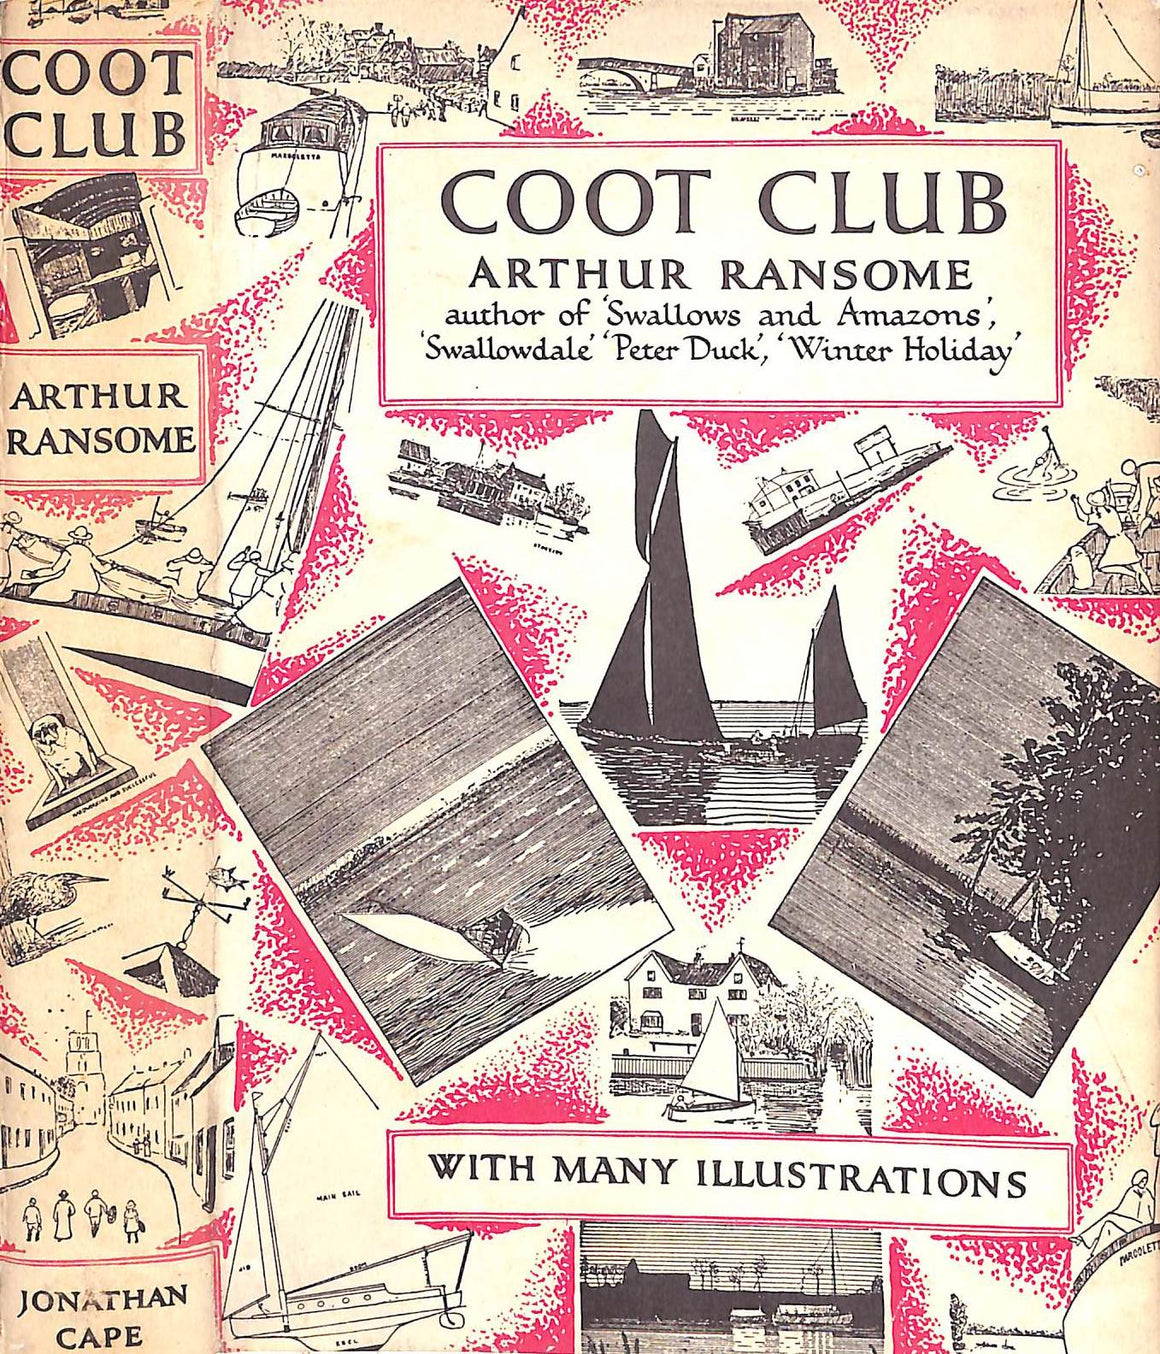 "Coot Club" 1964 RANSOME, Arthur